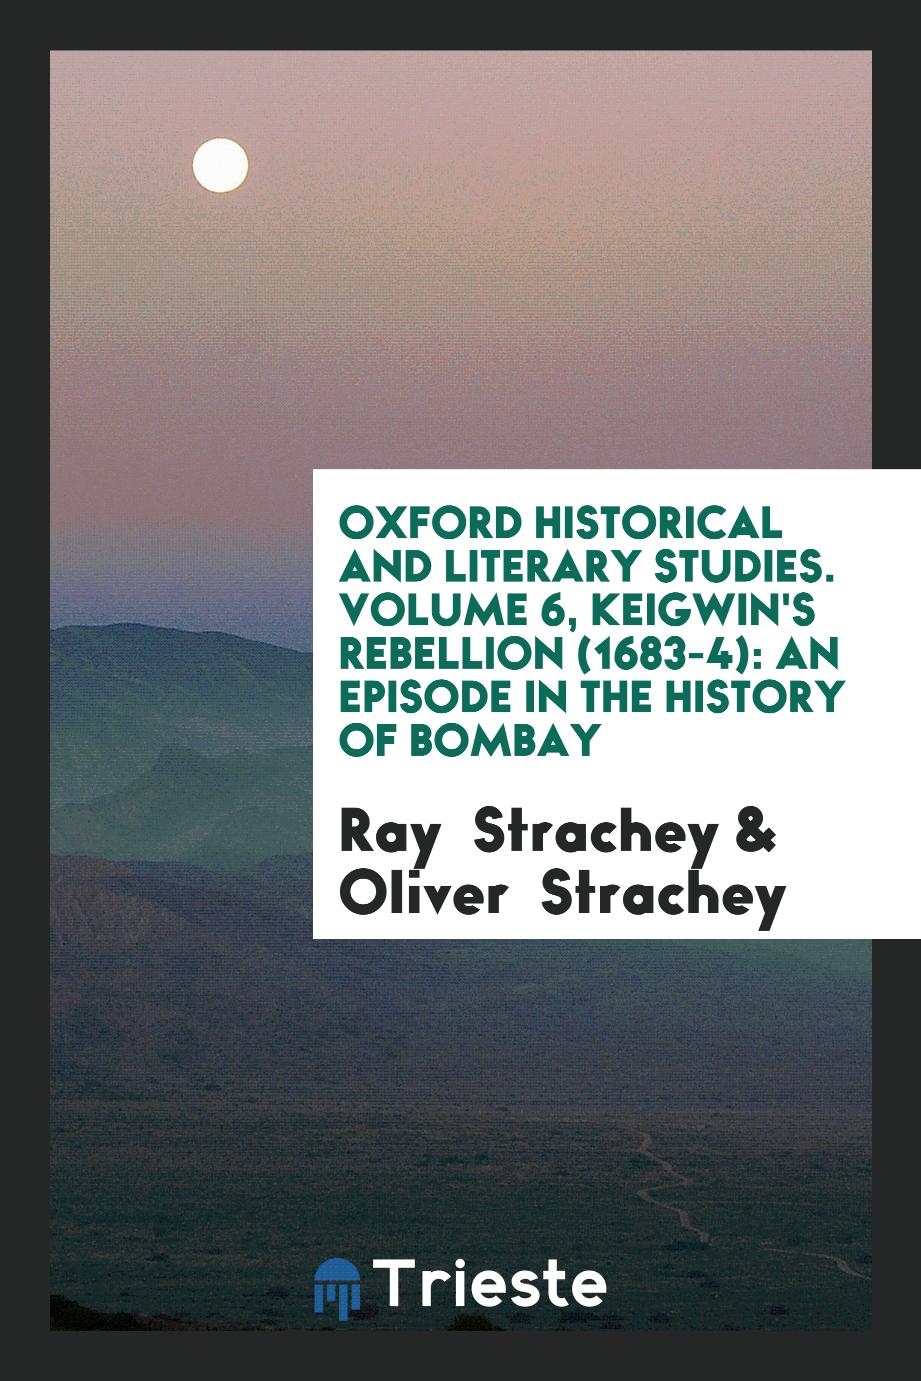 Oxford Historical and Literary Studies. Volume 6, Keigwin's Rebellion (1683-4): An Episode in the History of Bombay